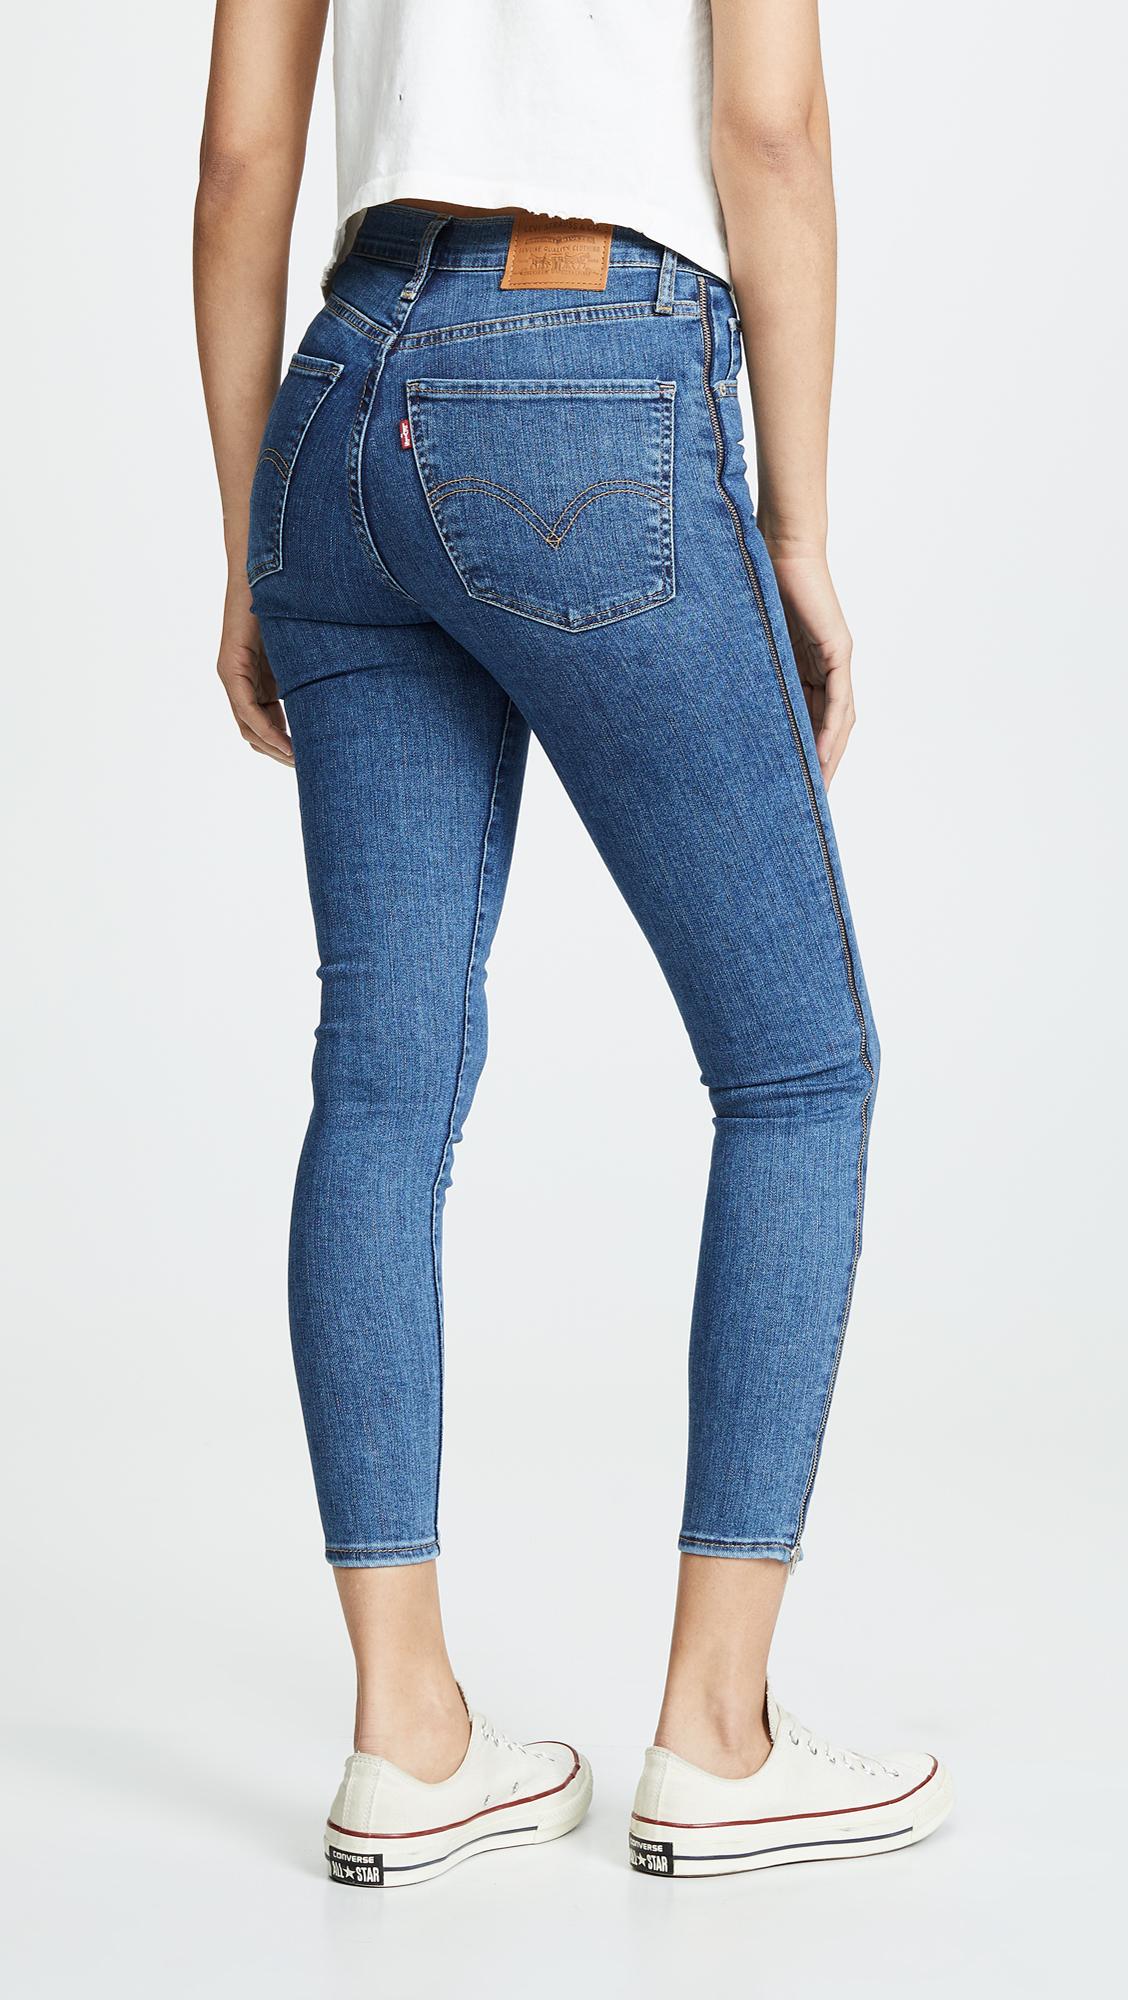 Overtreding Kust Flash Levi's Mile High Ankle Zip Jeans in Blue | Lyst